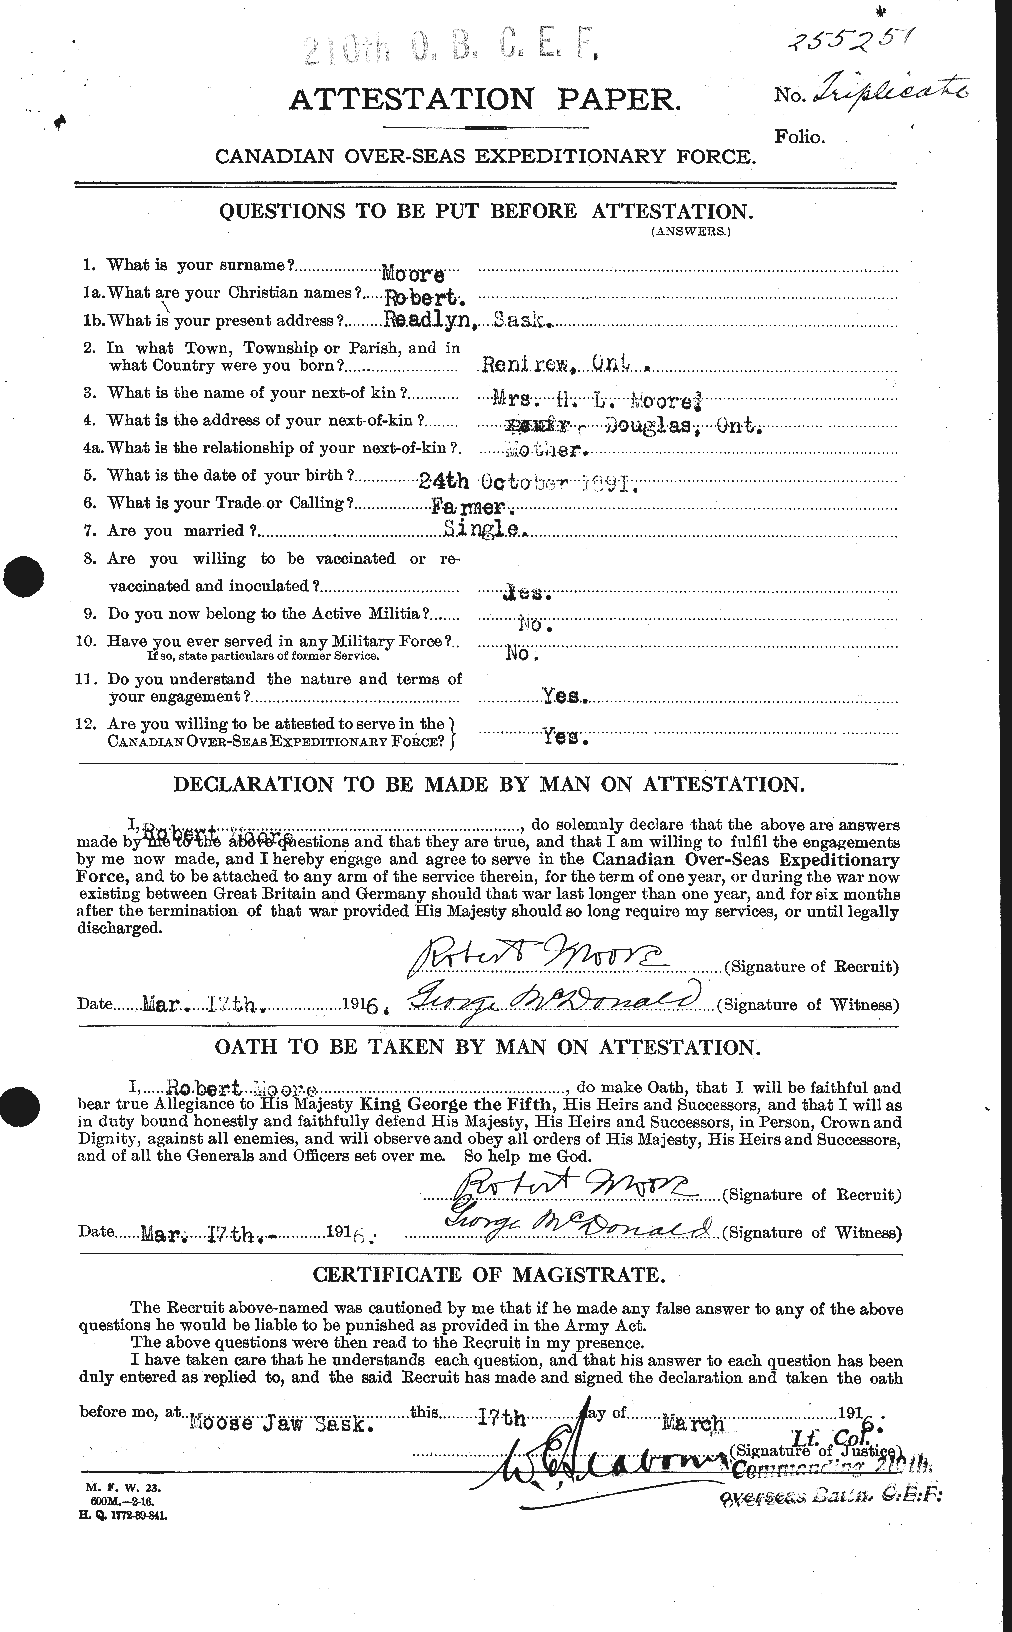 Personnel Records of the First World War - CEF 503545a